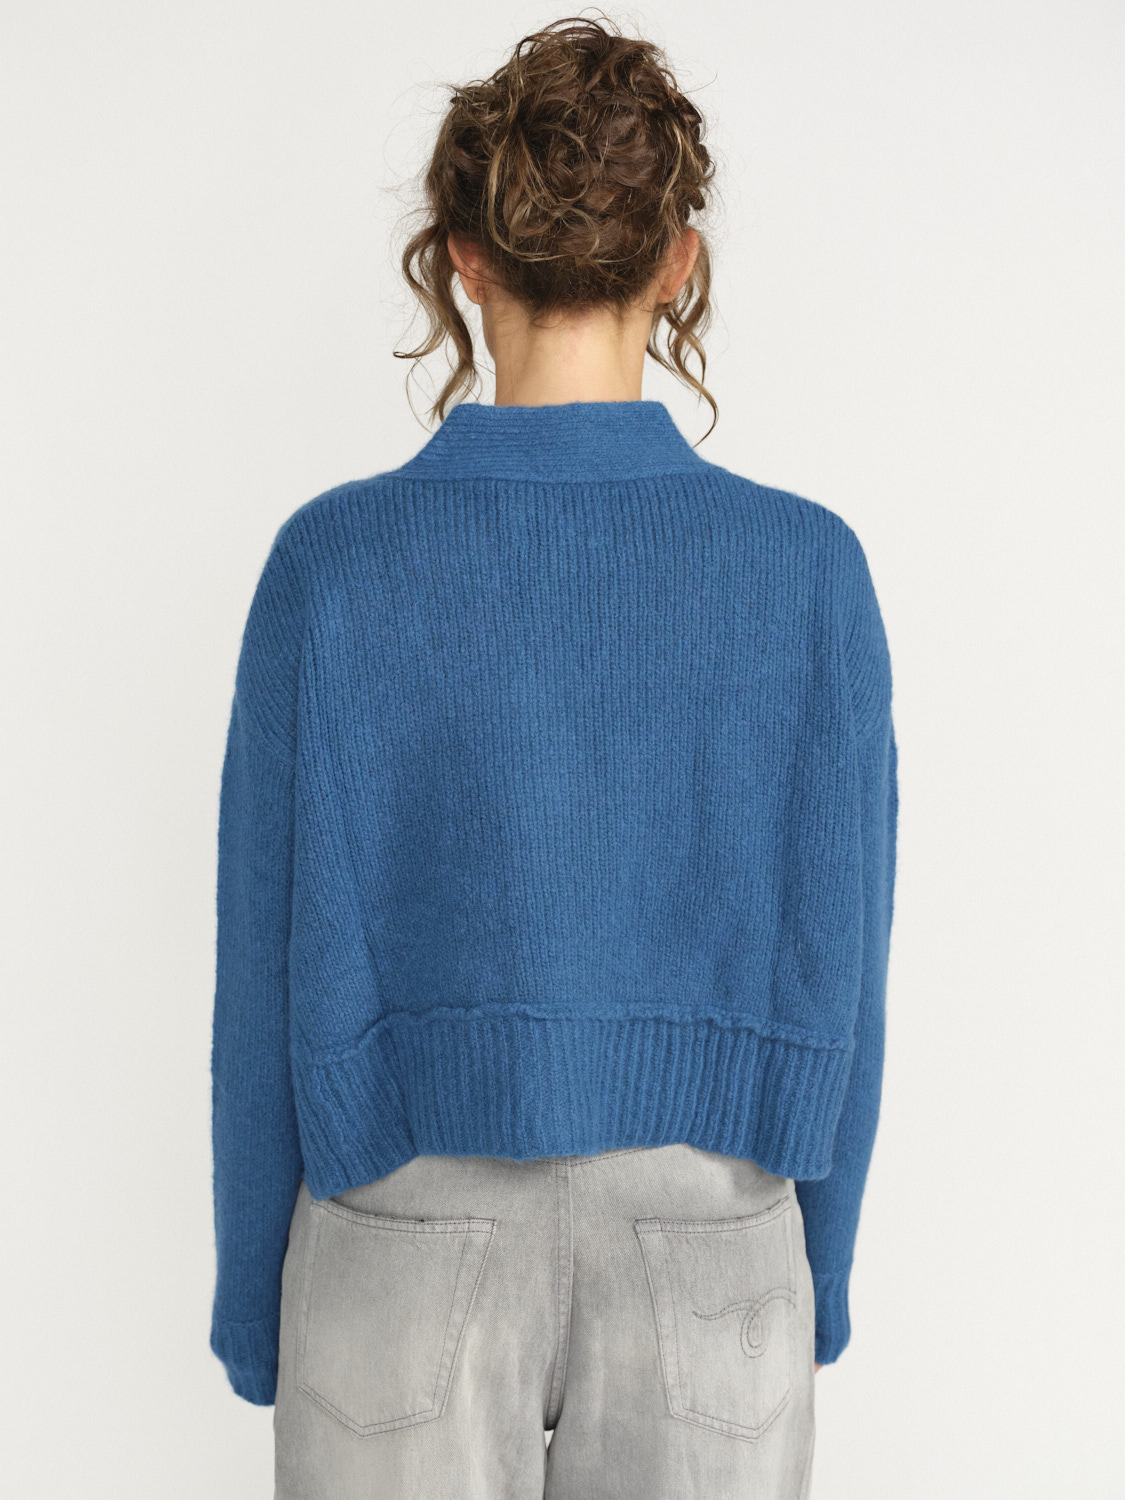 LU Ren Riely D. - Oversized cardigan with button placket blue XS